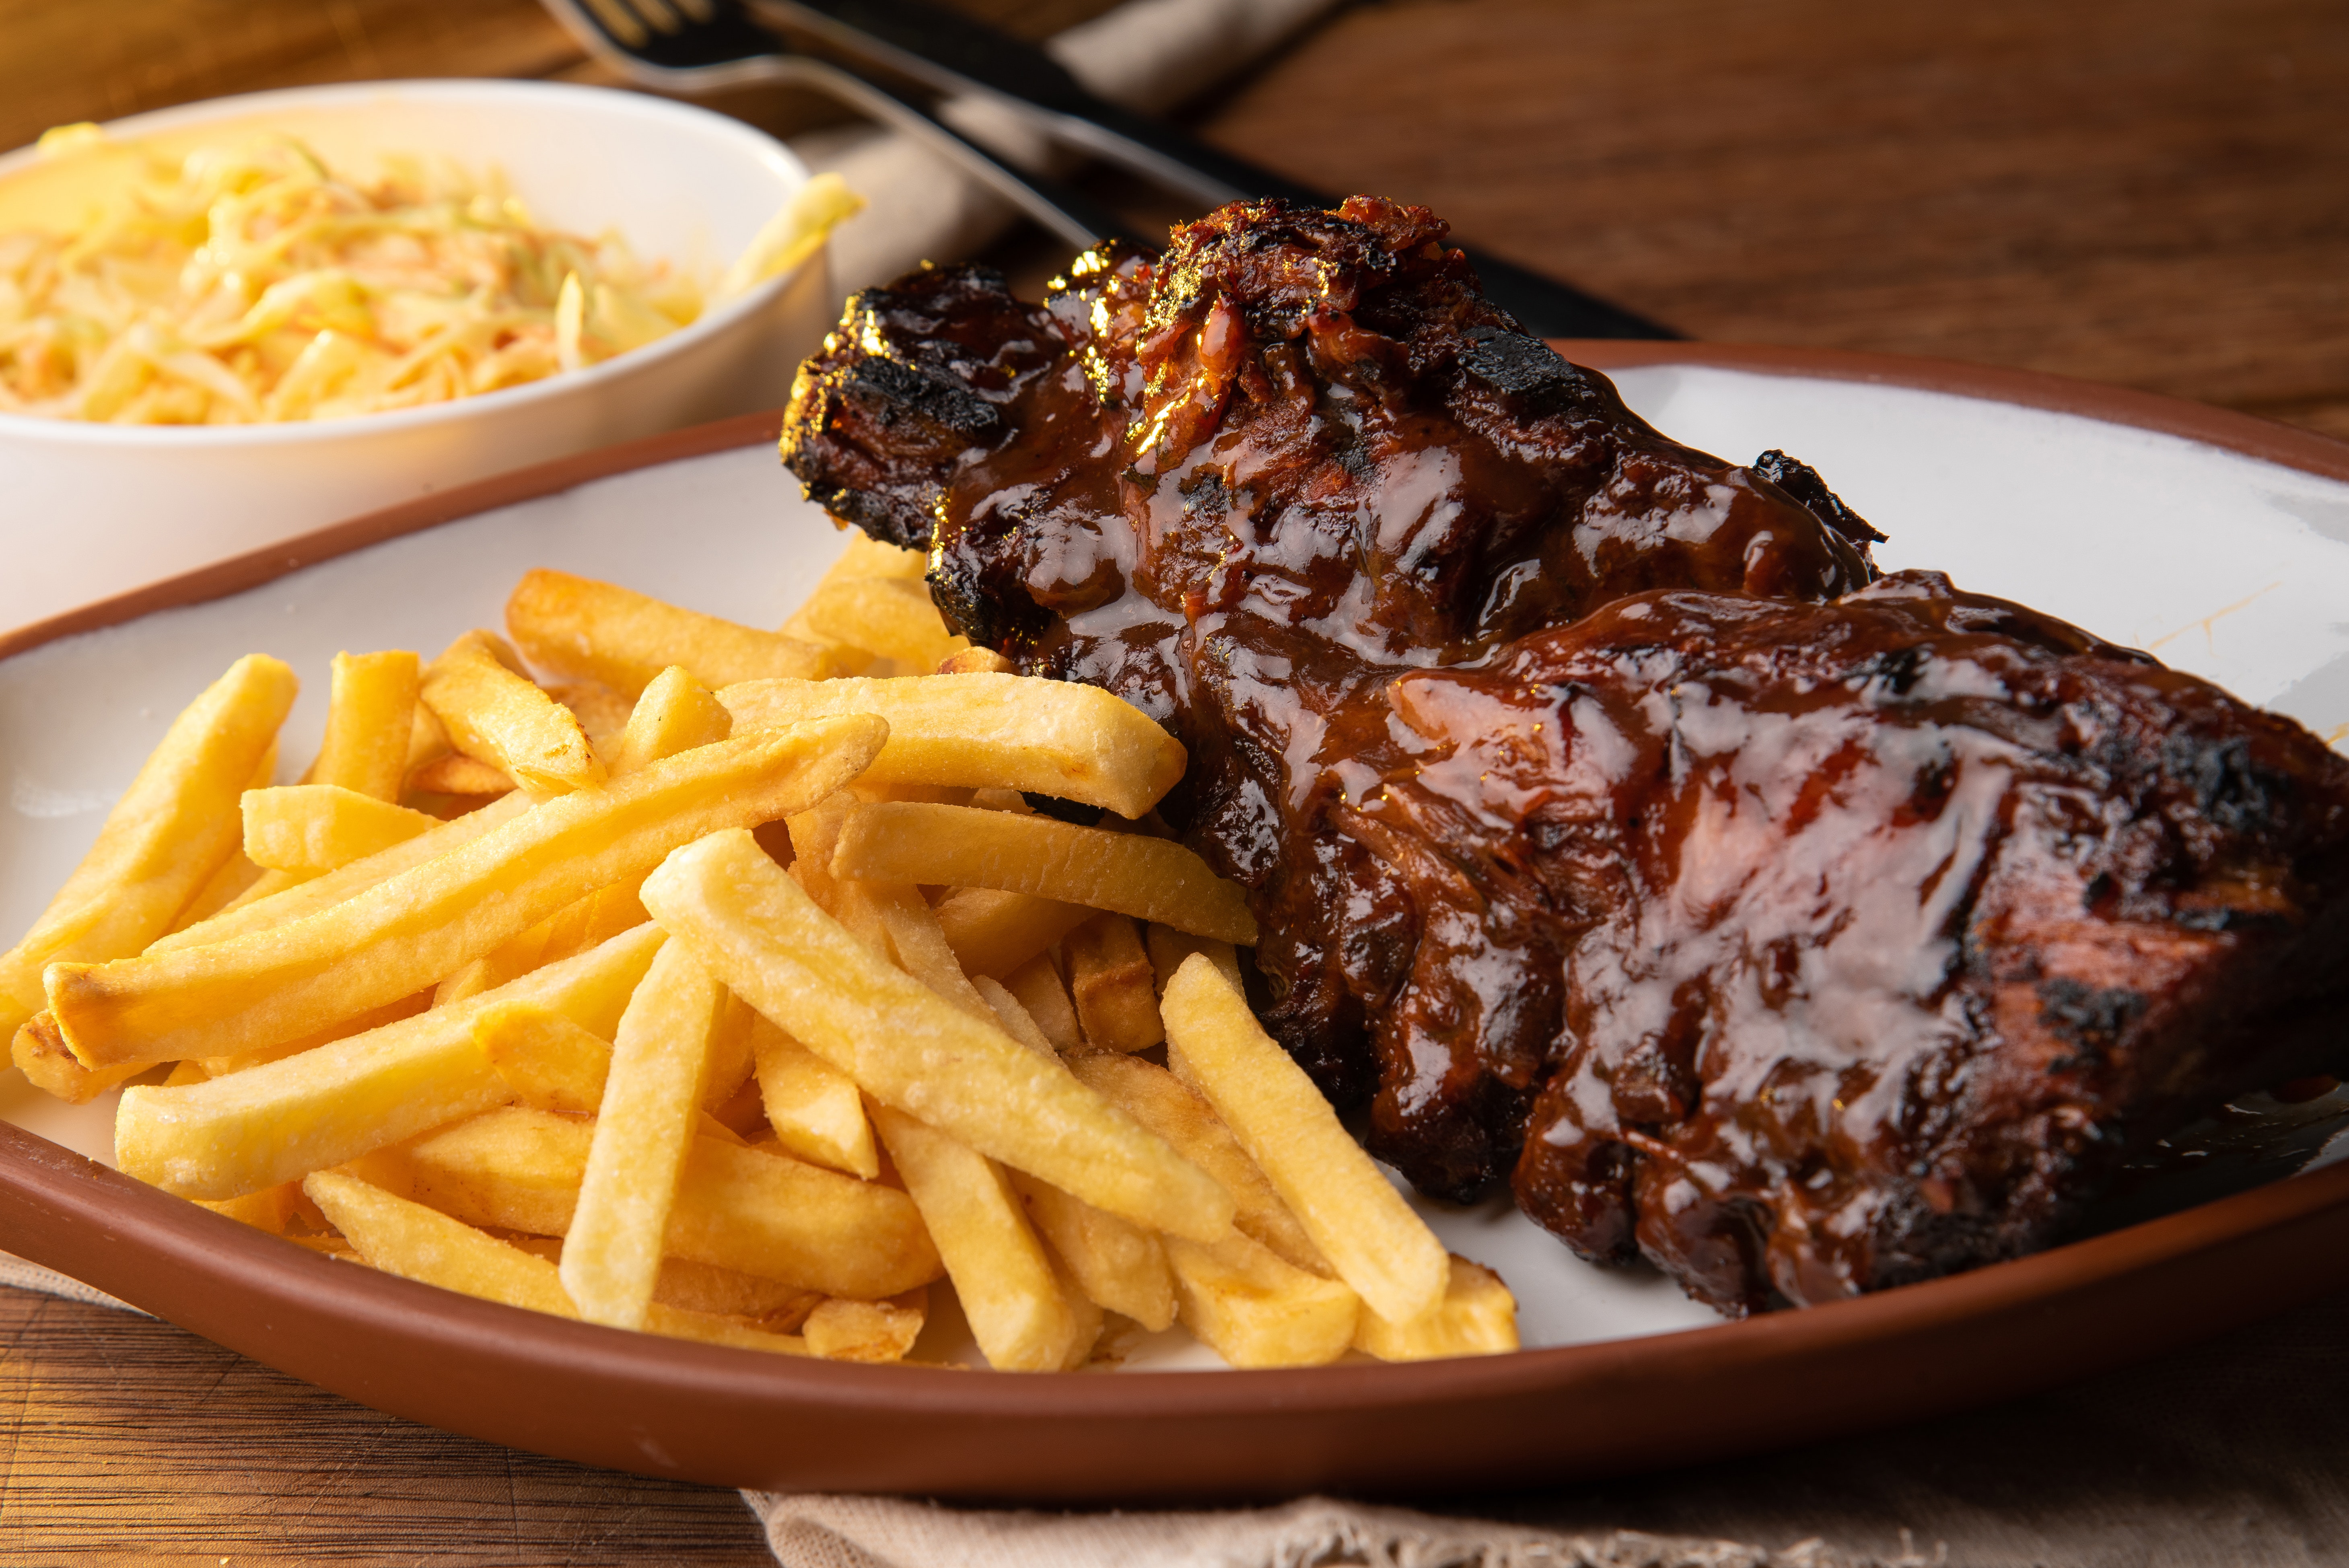 TENDER ANGUS RIBS PREPARED IN BARBECUE